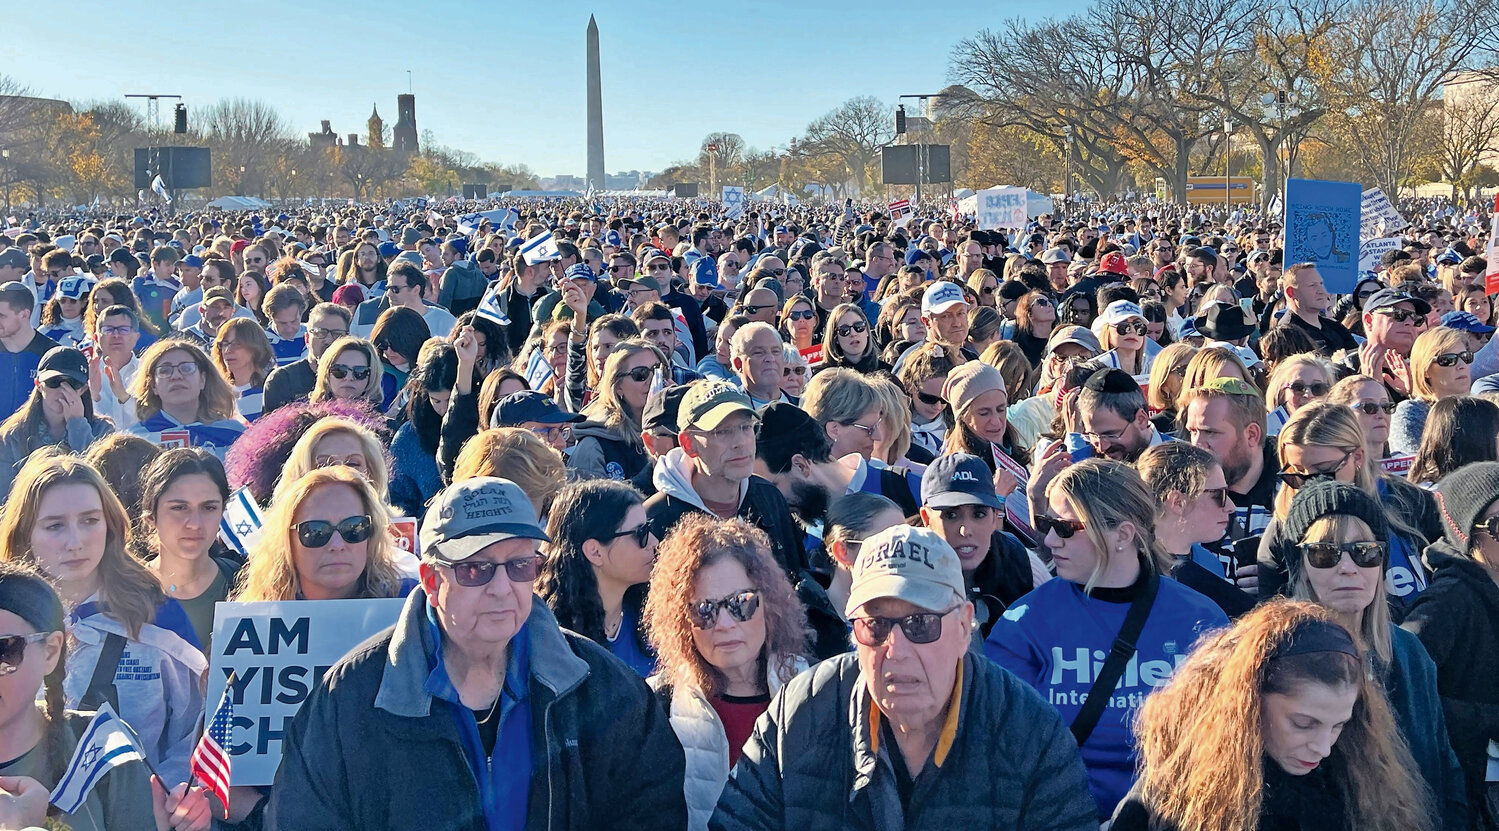 Some of the nearly 300,000 people who spoke truth to power when they rallied on the National Mall to support the righteousness of Israel’s cause, on Nov. 15.